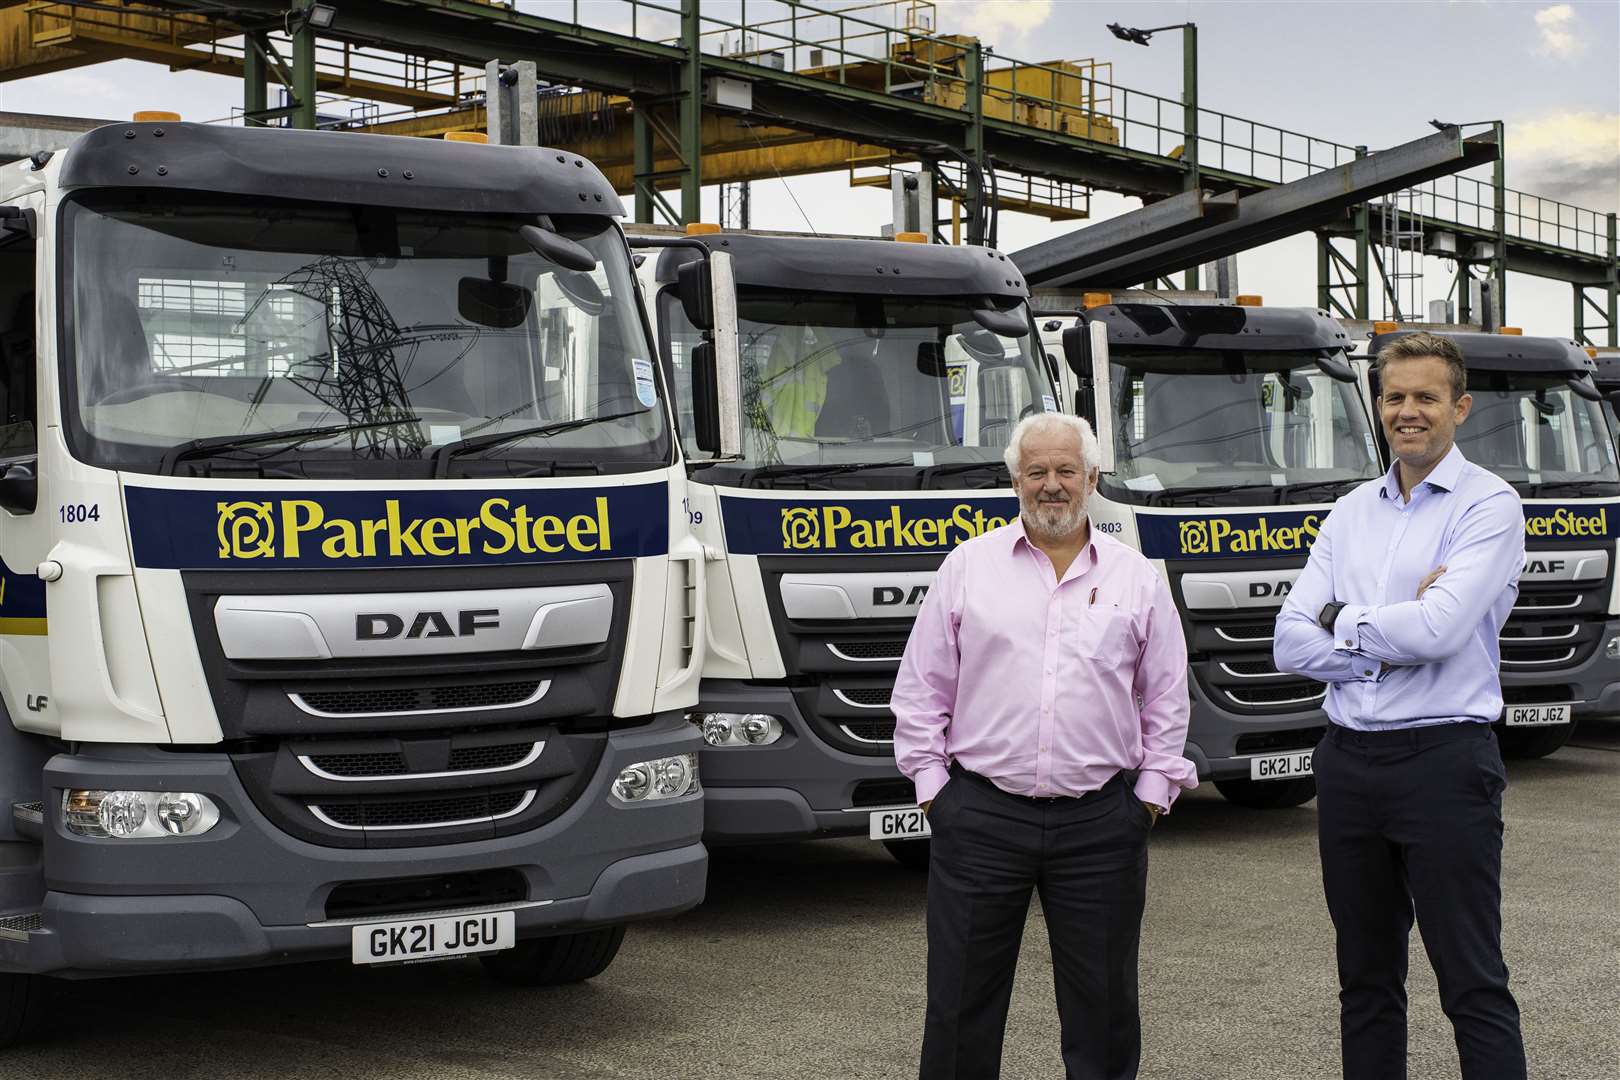 ParkerSteel has a new man in charge